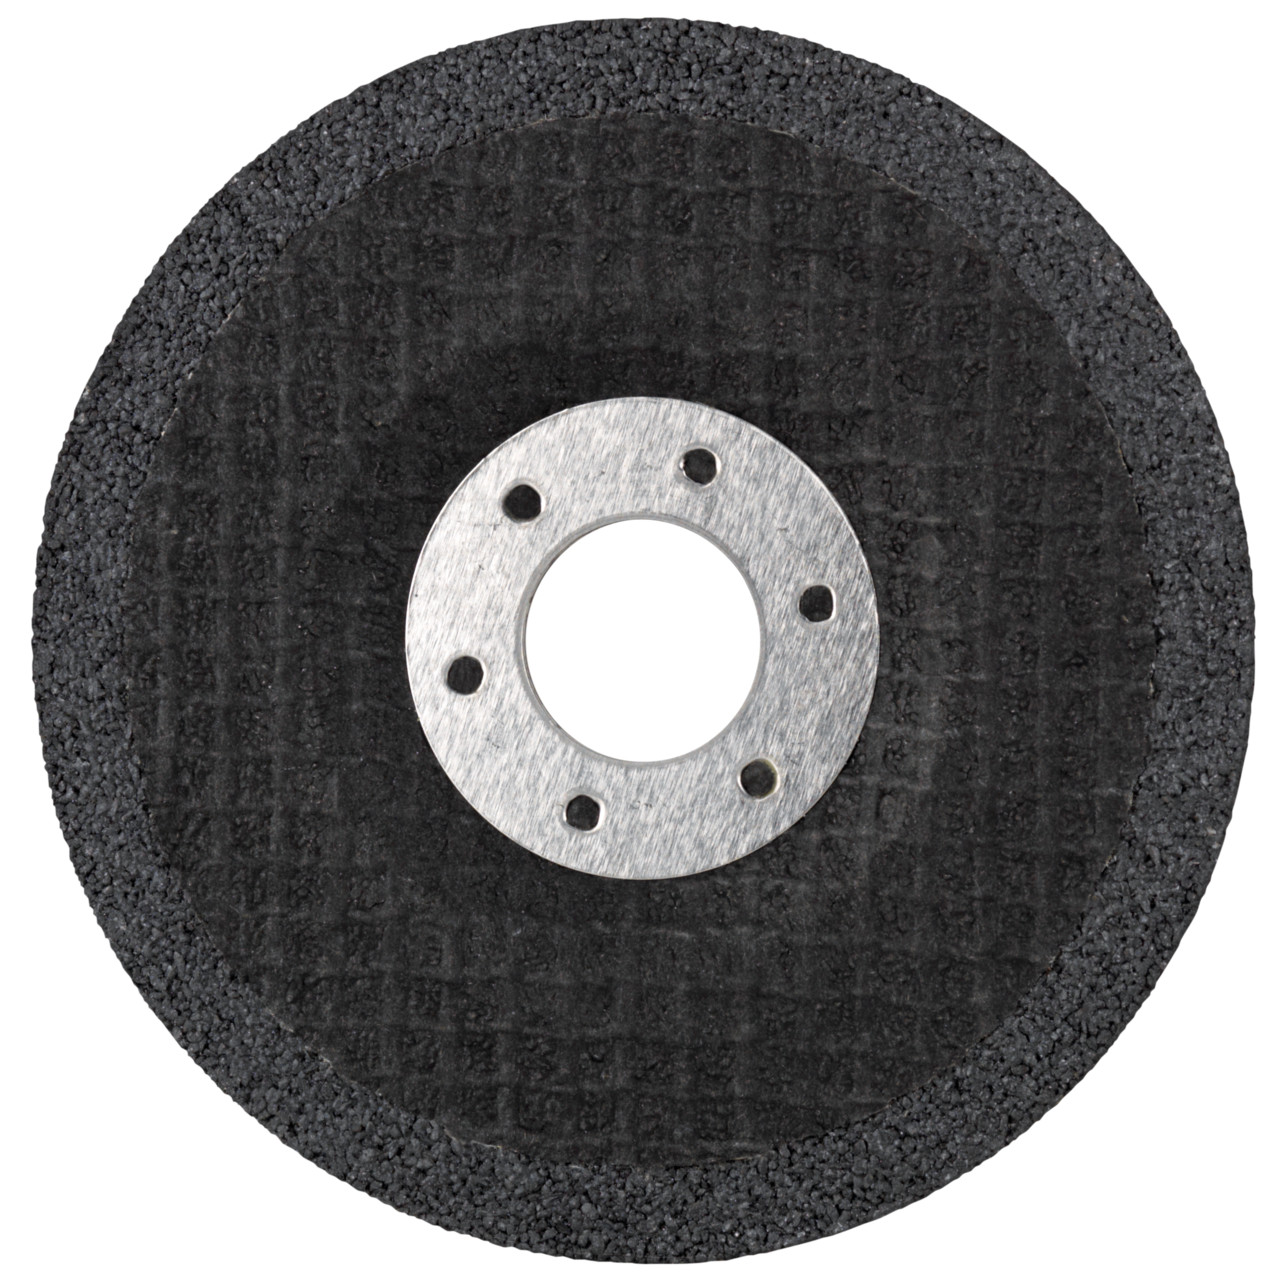 Tyrolit Cut-off wheel CUT AND GRIND DxUxH 115x2.5x22.23 2in1 for steel and stainless steel, shape: 27CC - offset version (CUT AND GRIND), Art. 743942